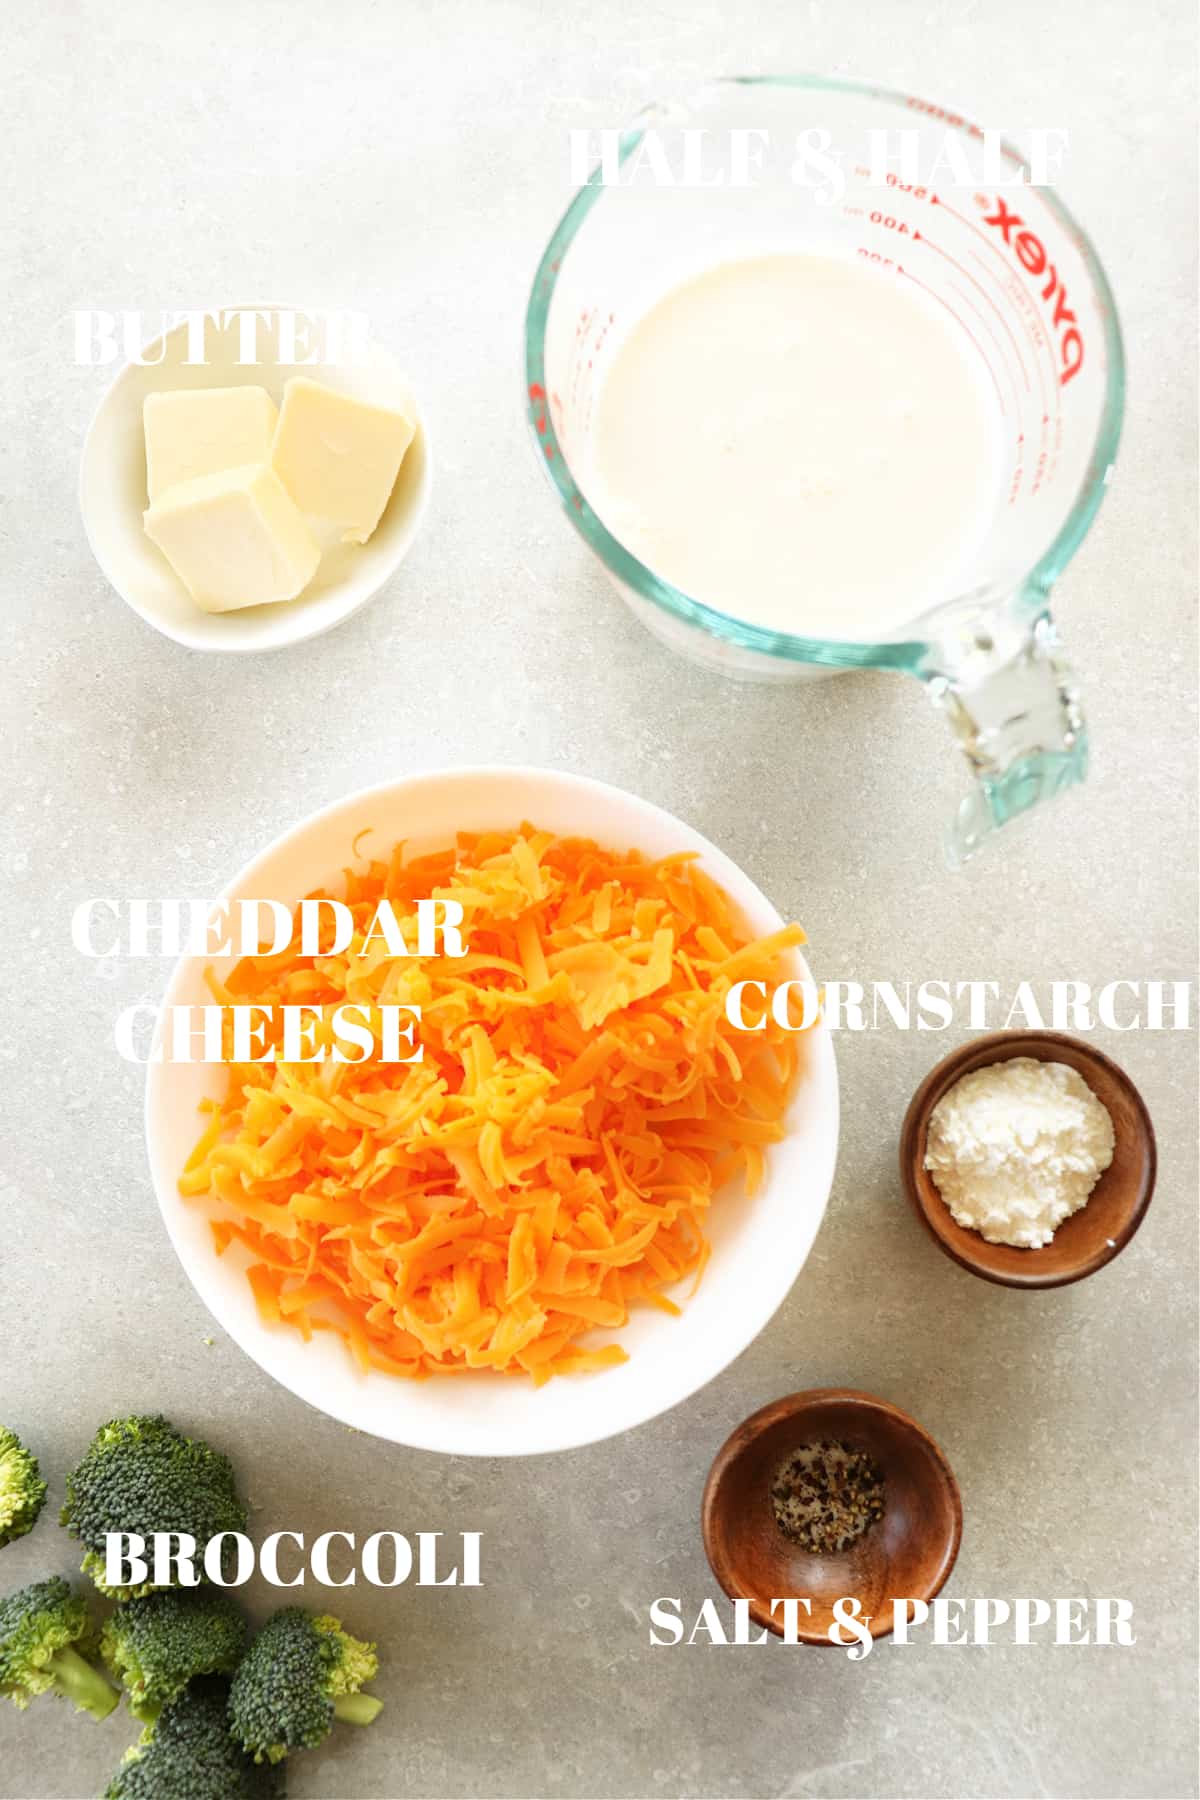 Ingredients for cheese sauce on a photography board.